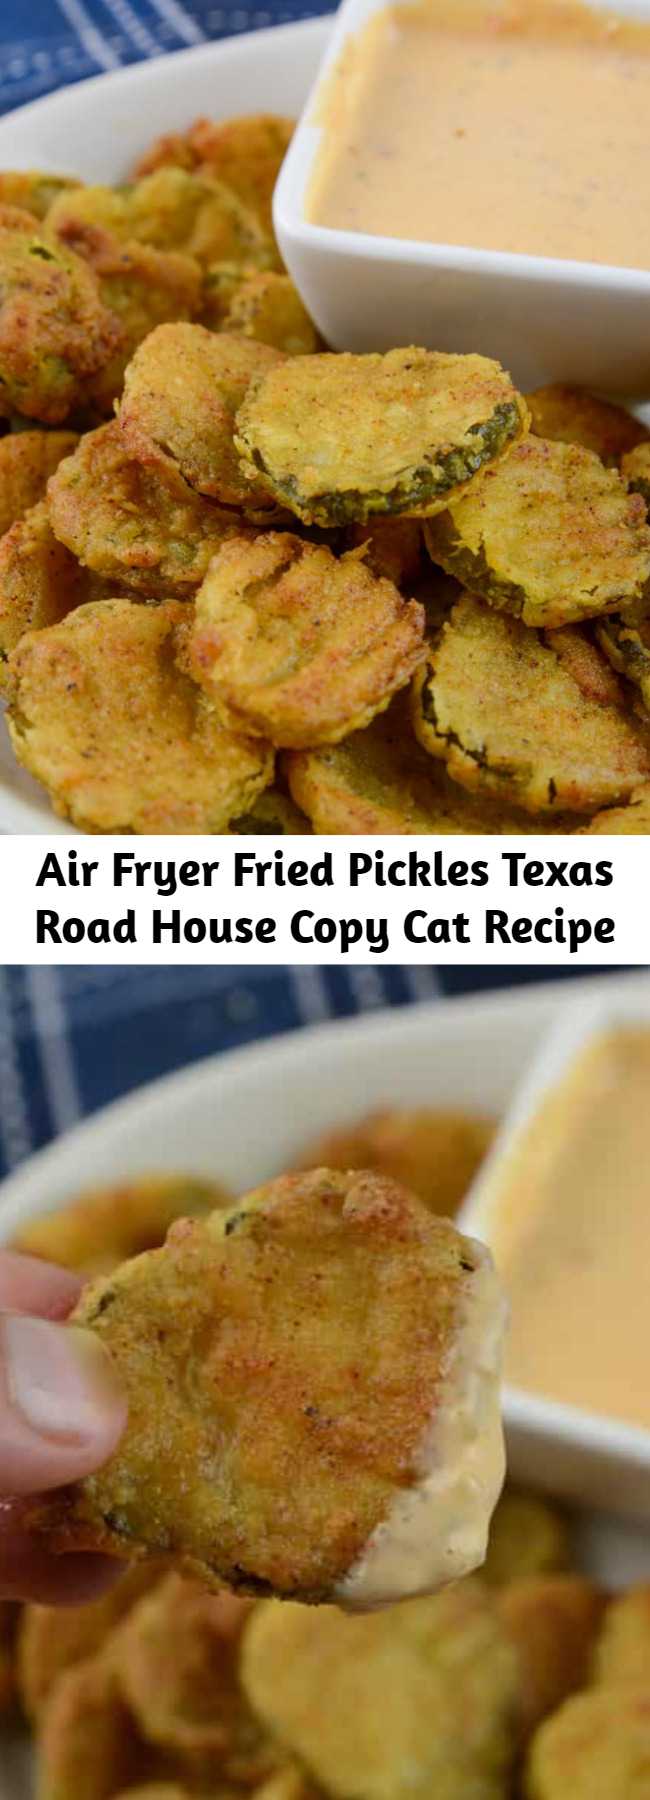 Air Fryer Fried Pickles Texas Road House Copy Cat Recipe - One of my favorites! This is a Texas Road House Copycat Fried Pickle recipe. To make it even better it is made right in the air fryer. Serve it as an appetizer as you root on your favorite team on Sunday night football, or a side dish paired next to a juicy hamburger. No matter how you serve up these gems, they are dynamite in flavor. #CopyCat #Airfryer #Appetizer #FriedPickles